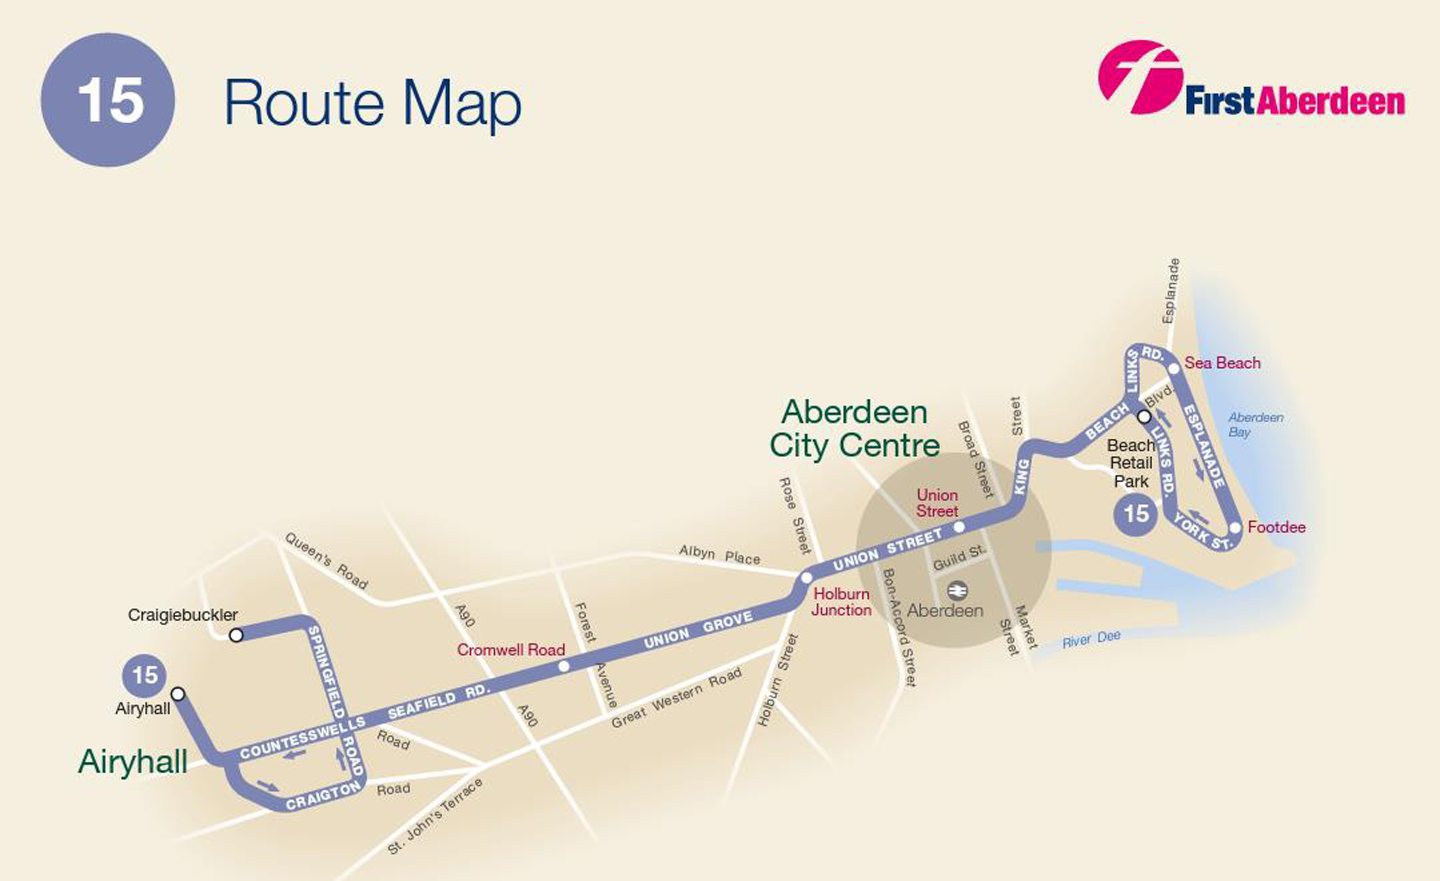 The previous route of the number 15 bus in Aberdeen.